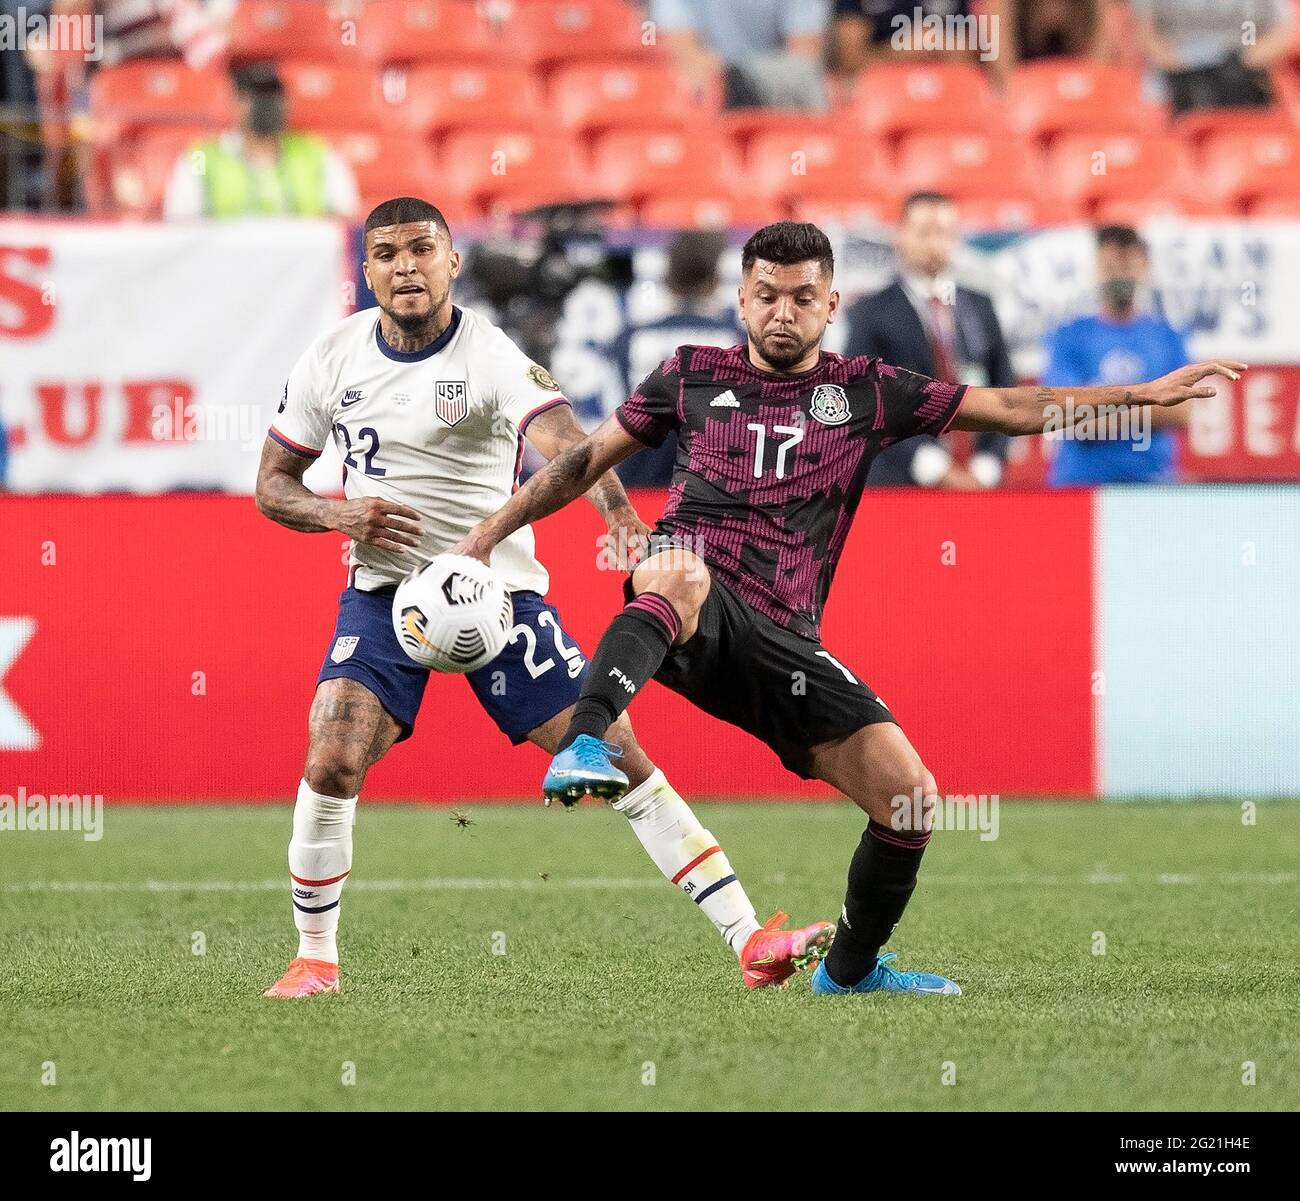 Denver, Colorado, USA. 6th June, 2021. Mexico F JESUS CORONA, right, battles with USA D DEANDRE YEDLIN, left, Sunday evening at Empower Field at Mile High. USA beats Mexico 3-2 in Overtime and win the Inaugural Concacaf Nations League Cup. Credit: Hector Acevedo/ZUMA Wire/Alamy Live News Stock Photo